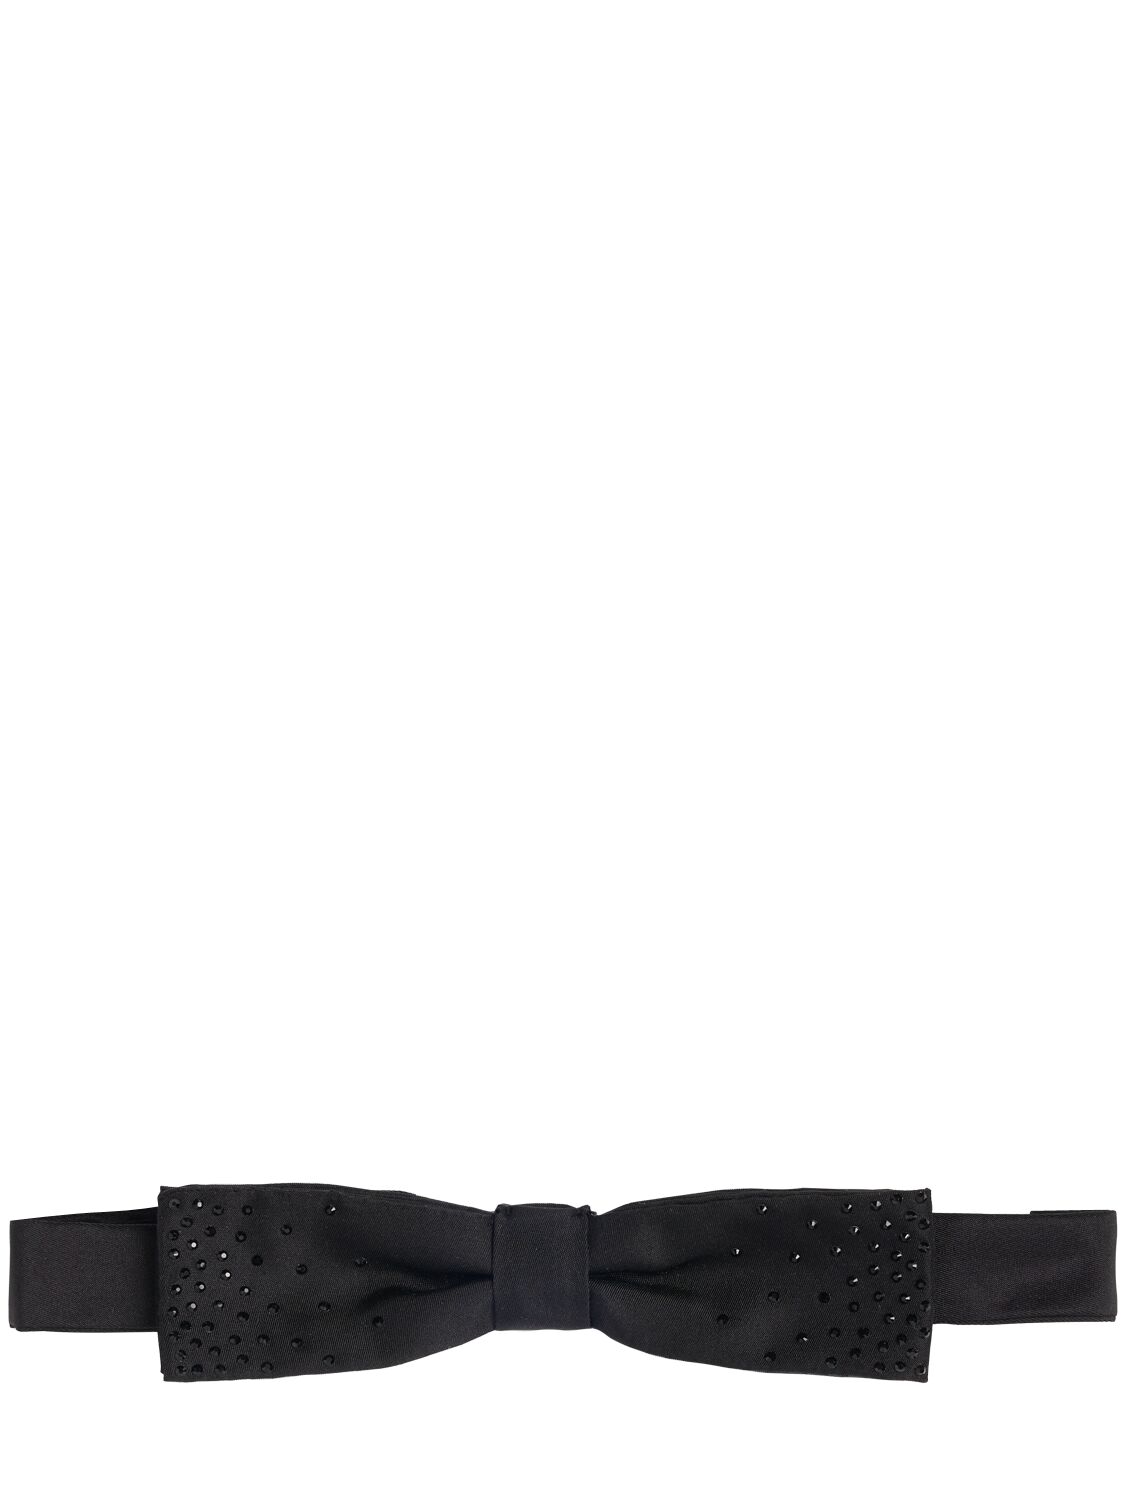 Dsquared2 Crystal Bow Tie In Black